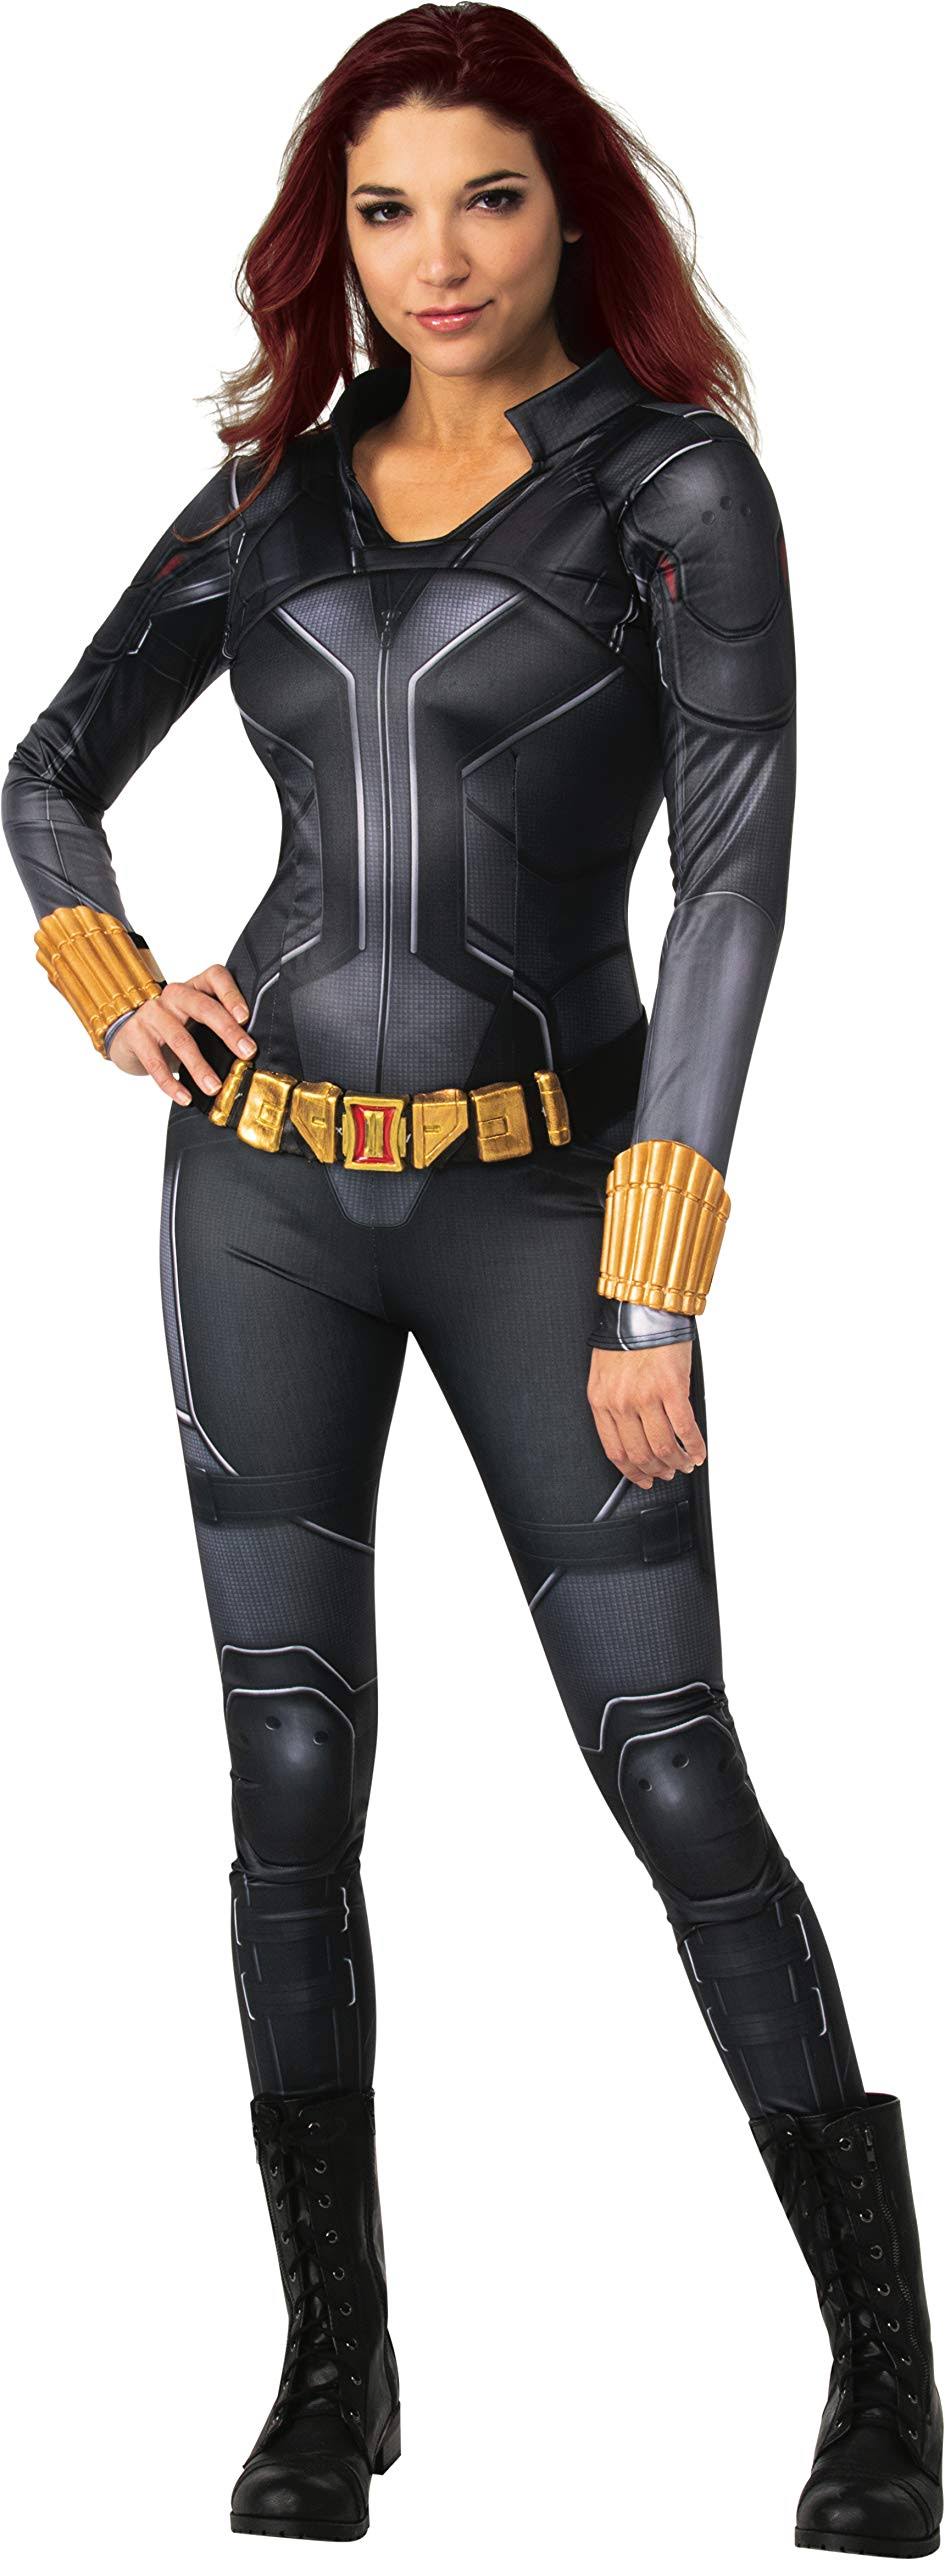 Adult Black Widow Deluxe Costume-Small